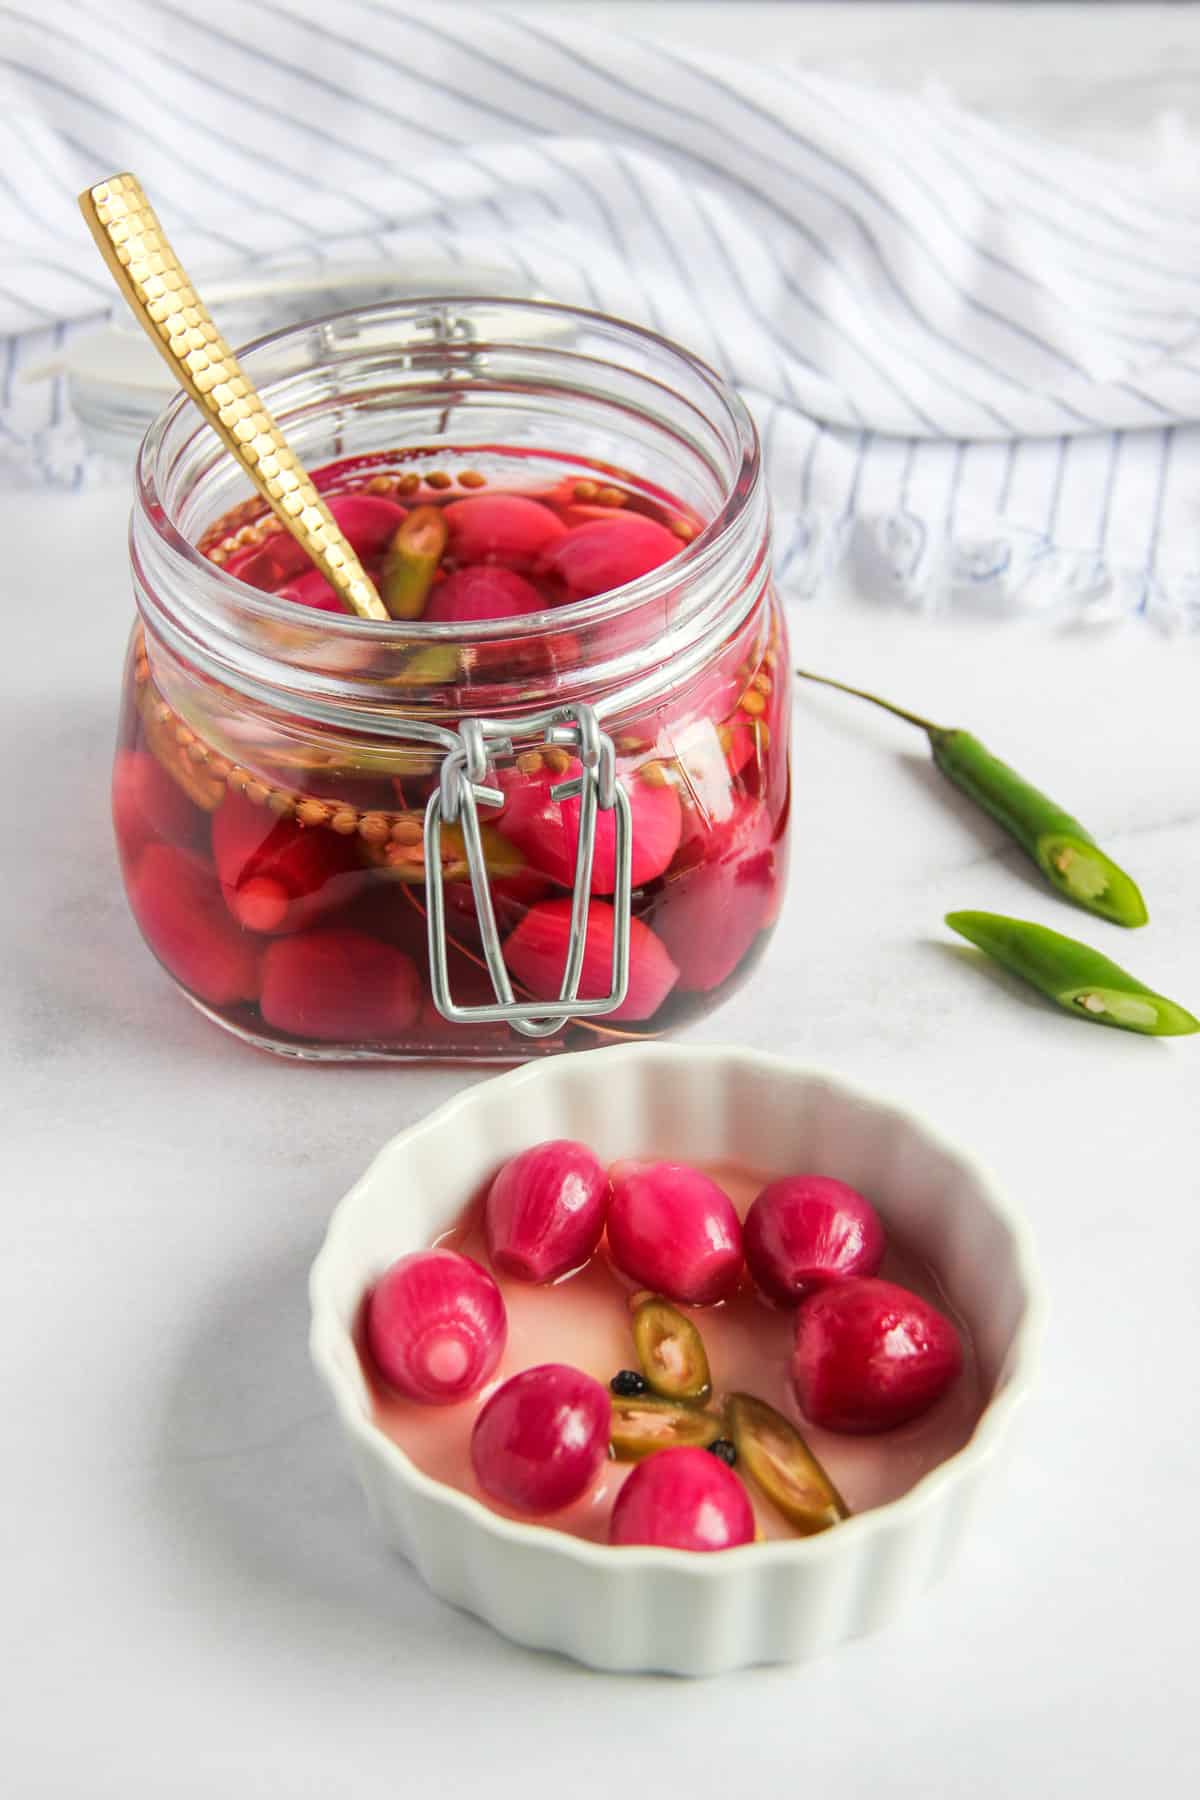 pickled pearl onions in a white plate and in a glass jar